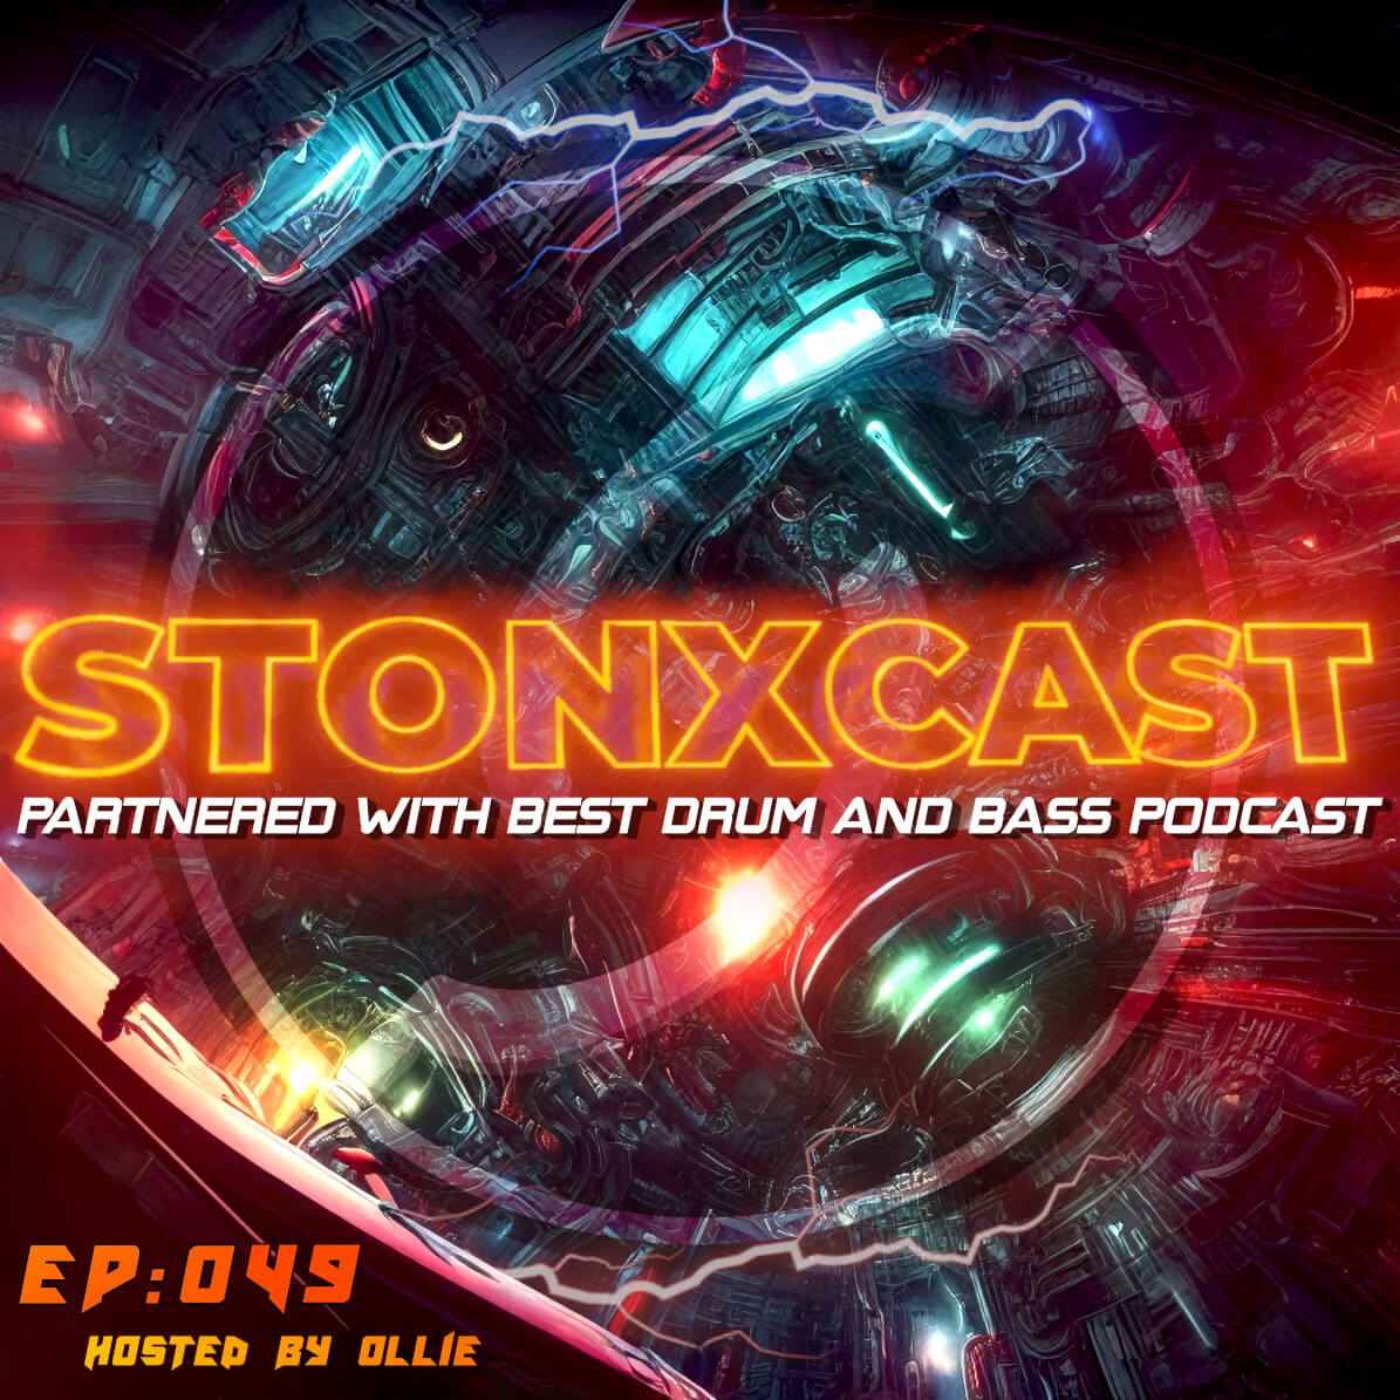 Stonxcast EP:049 - Hosted by Ollie Artwork